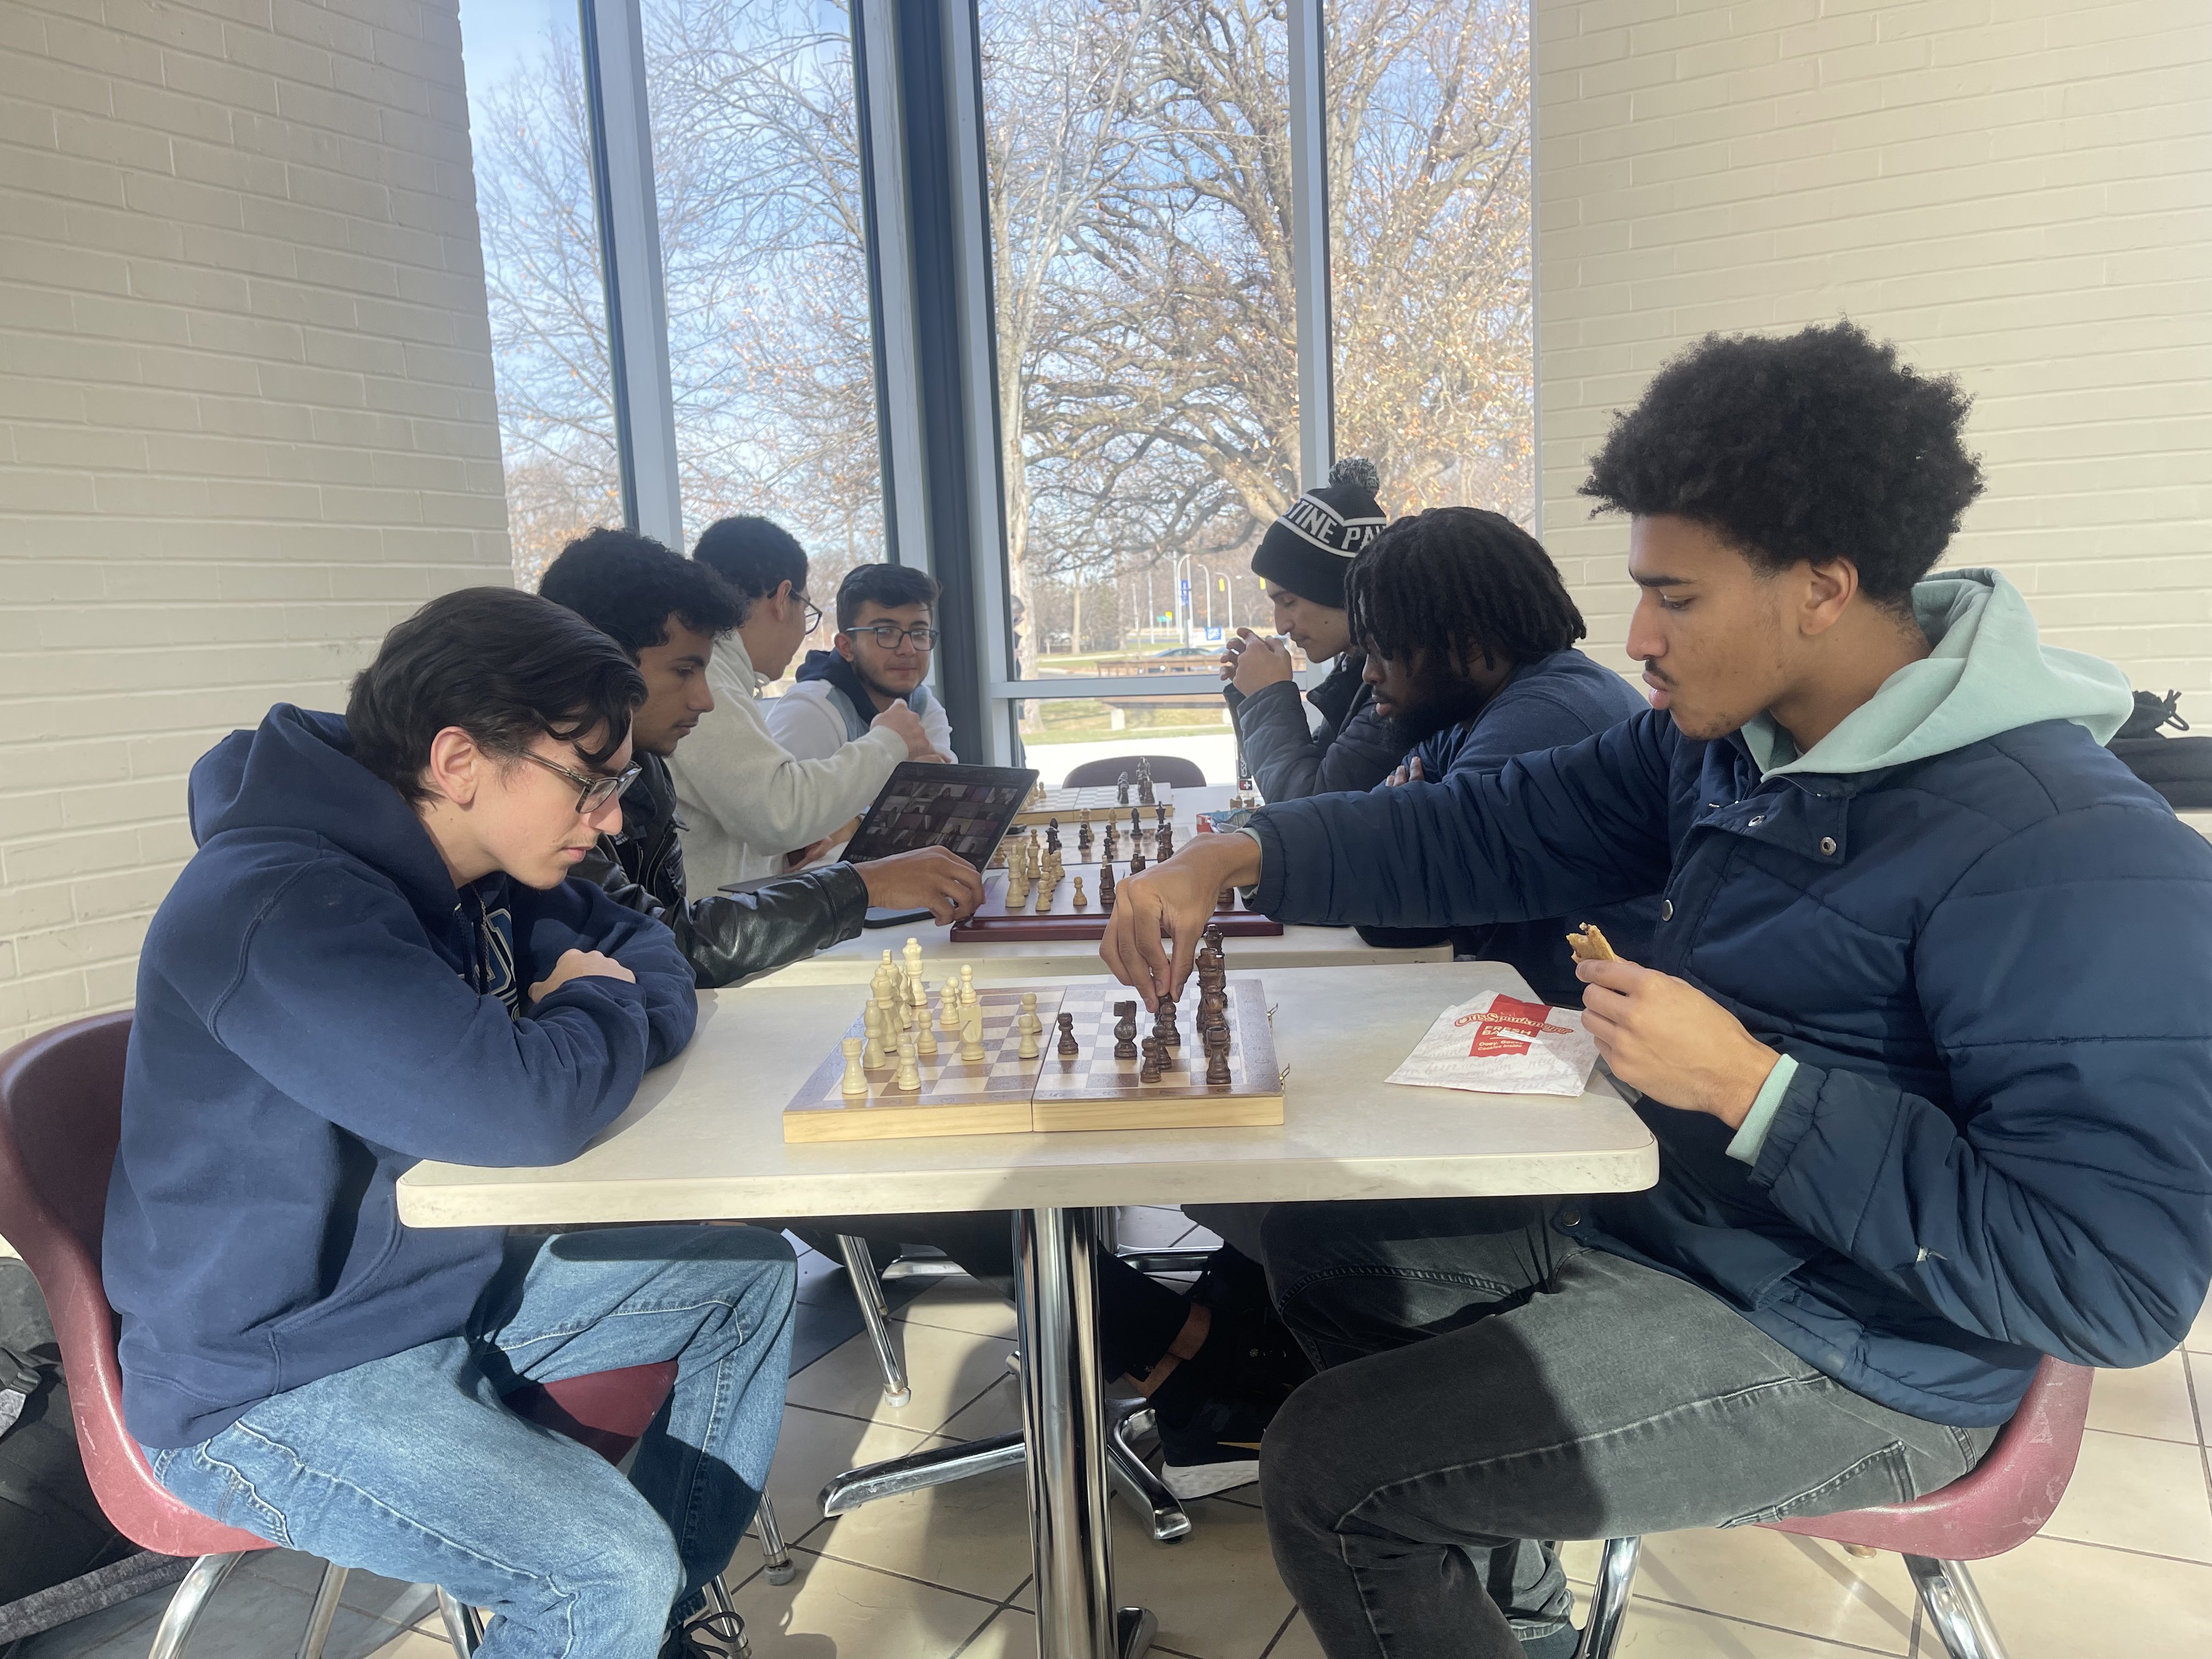 Henry Ford College Chess Club members in the Pavilion of the Student and Culinary Arts Center, Henry Ford College main campus, Dearborn, MI